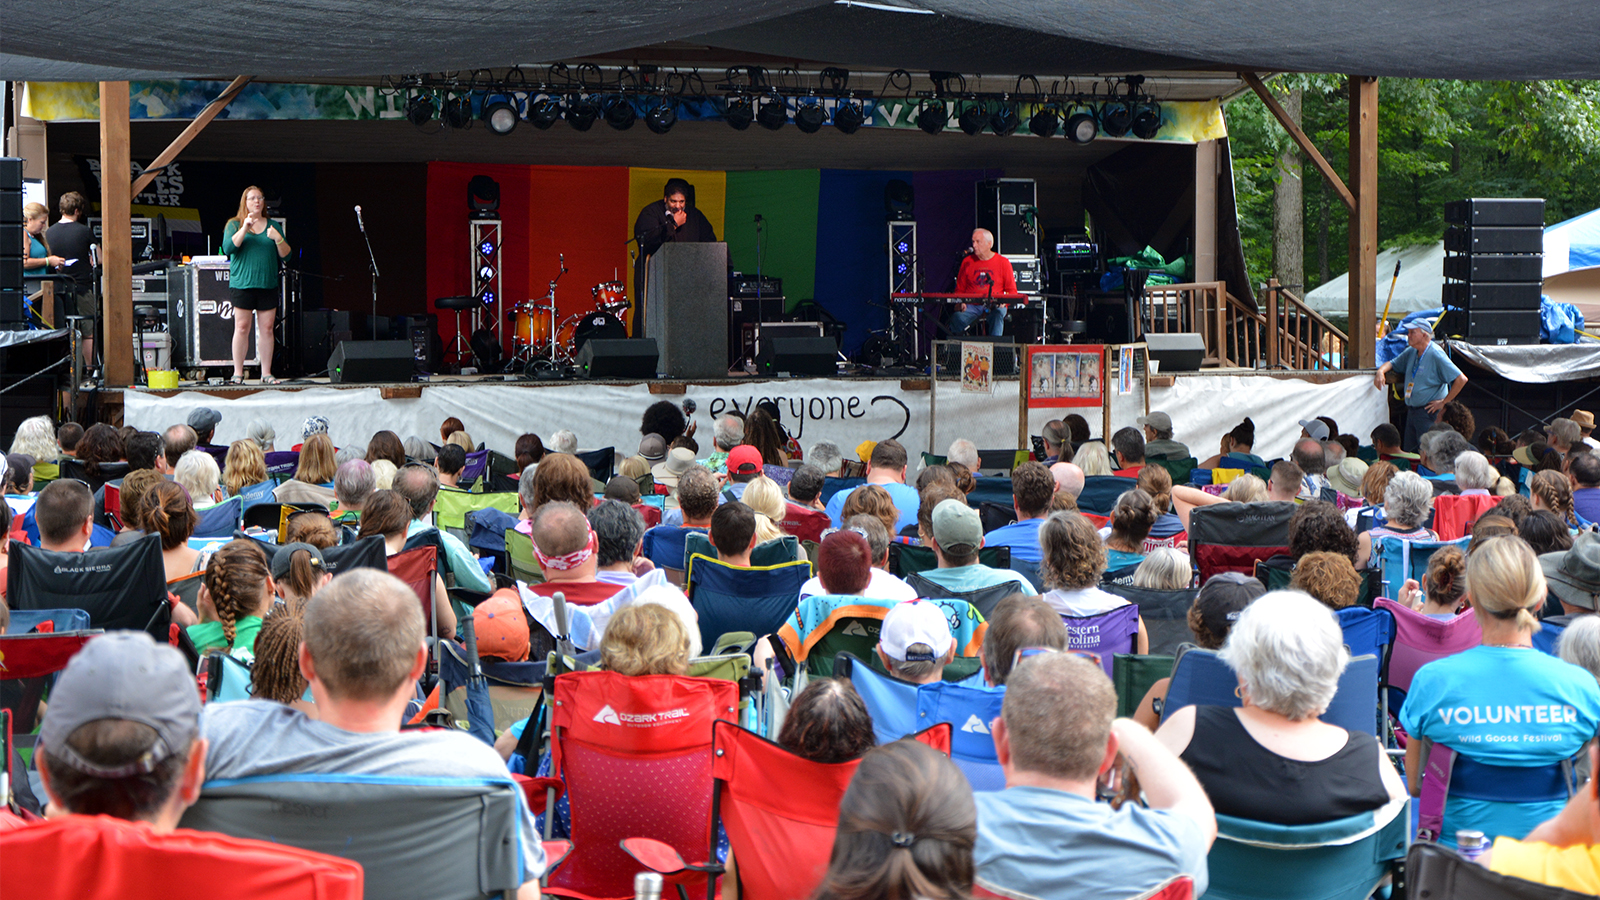 The Rev. William Barber, top center, addresses attendees at the Wild Goose Festival in Hot Springs, N.C., on July 13, 2019. RNS photo by Jack Jenkins